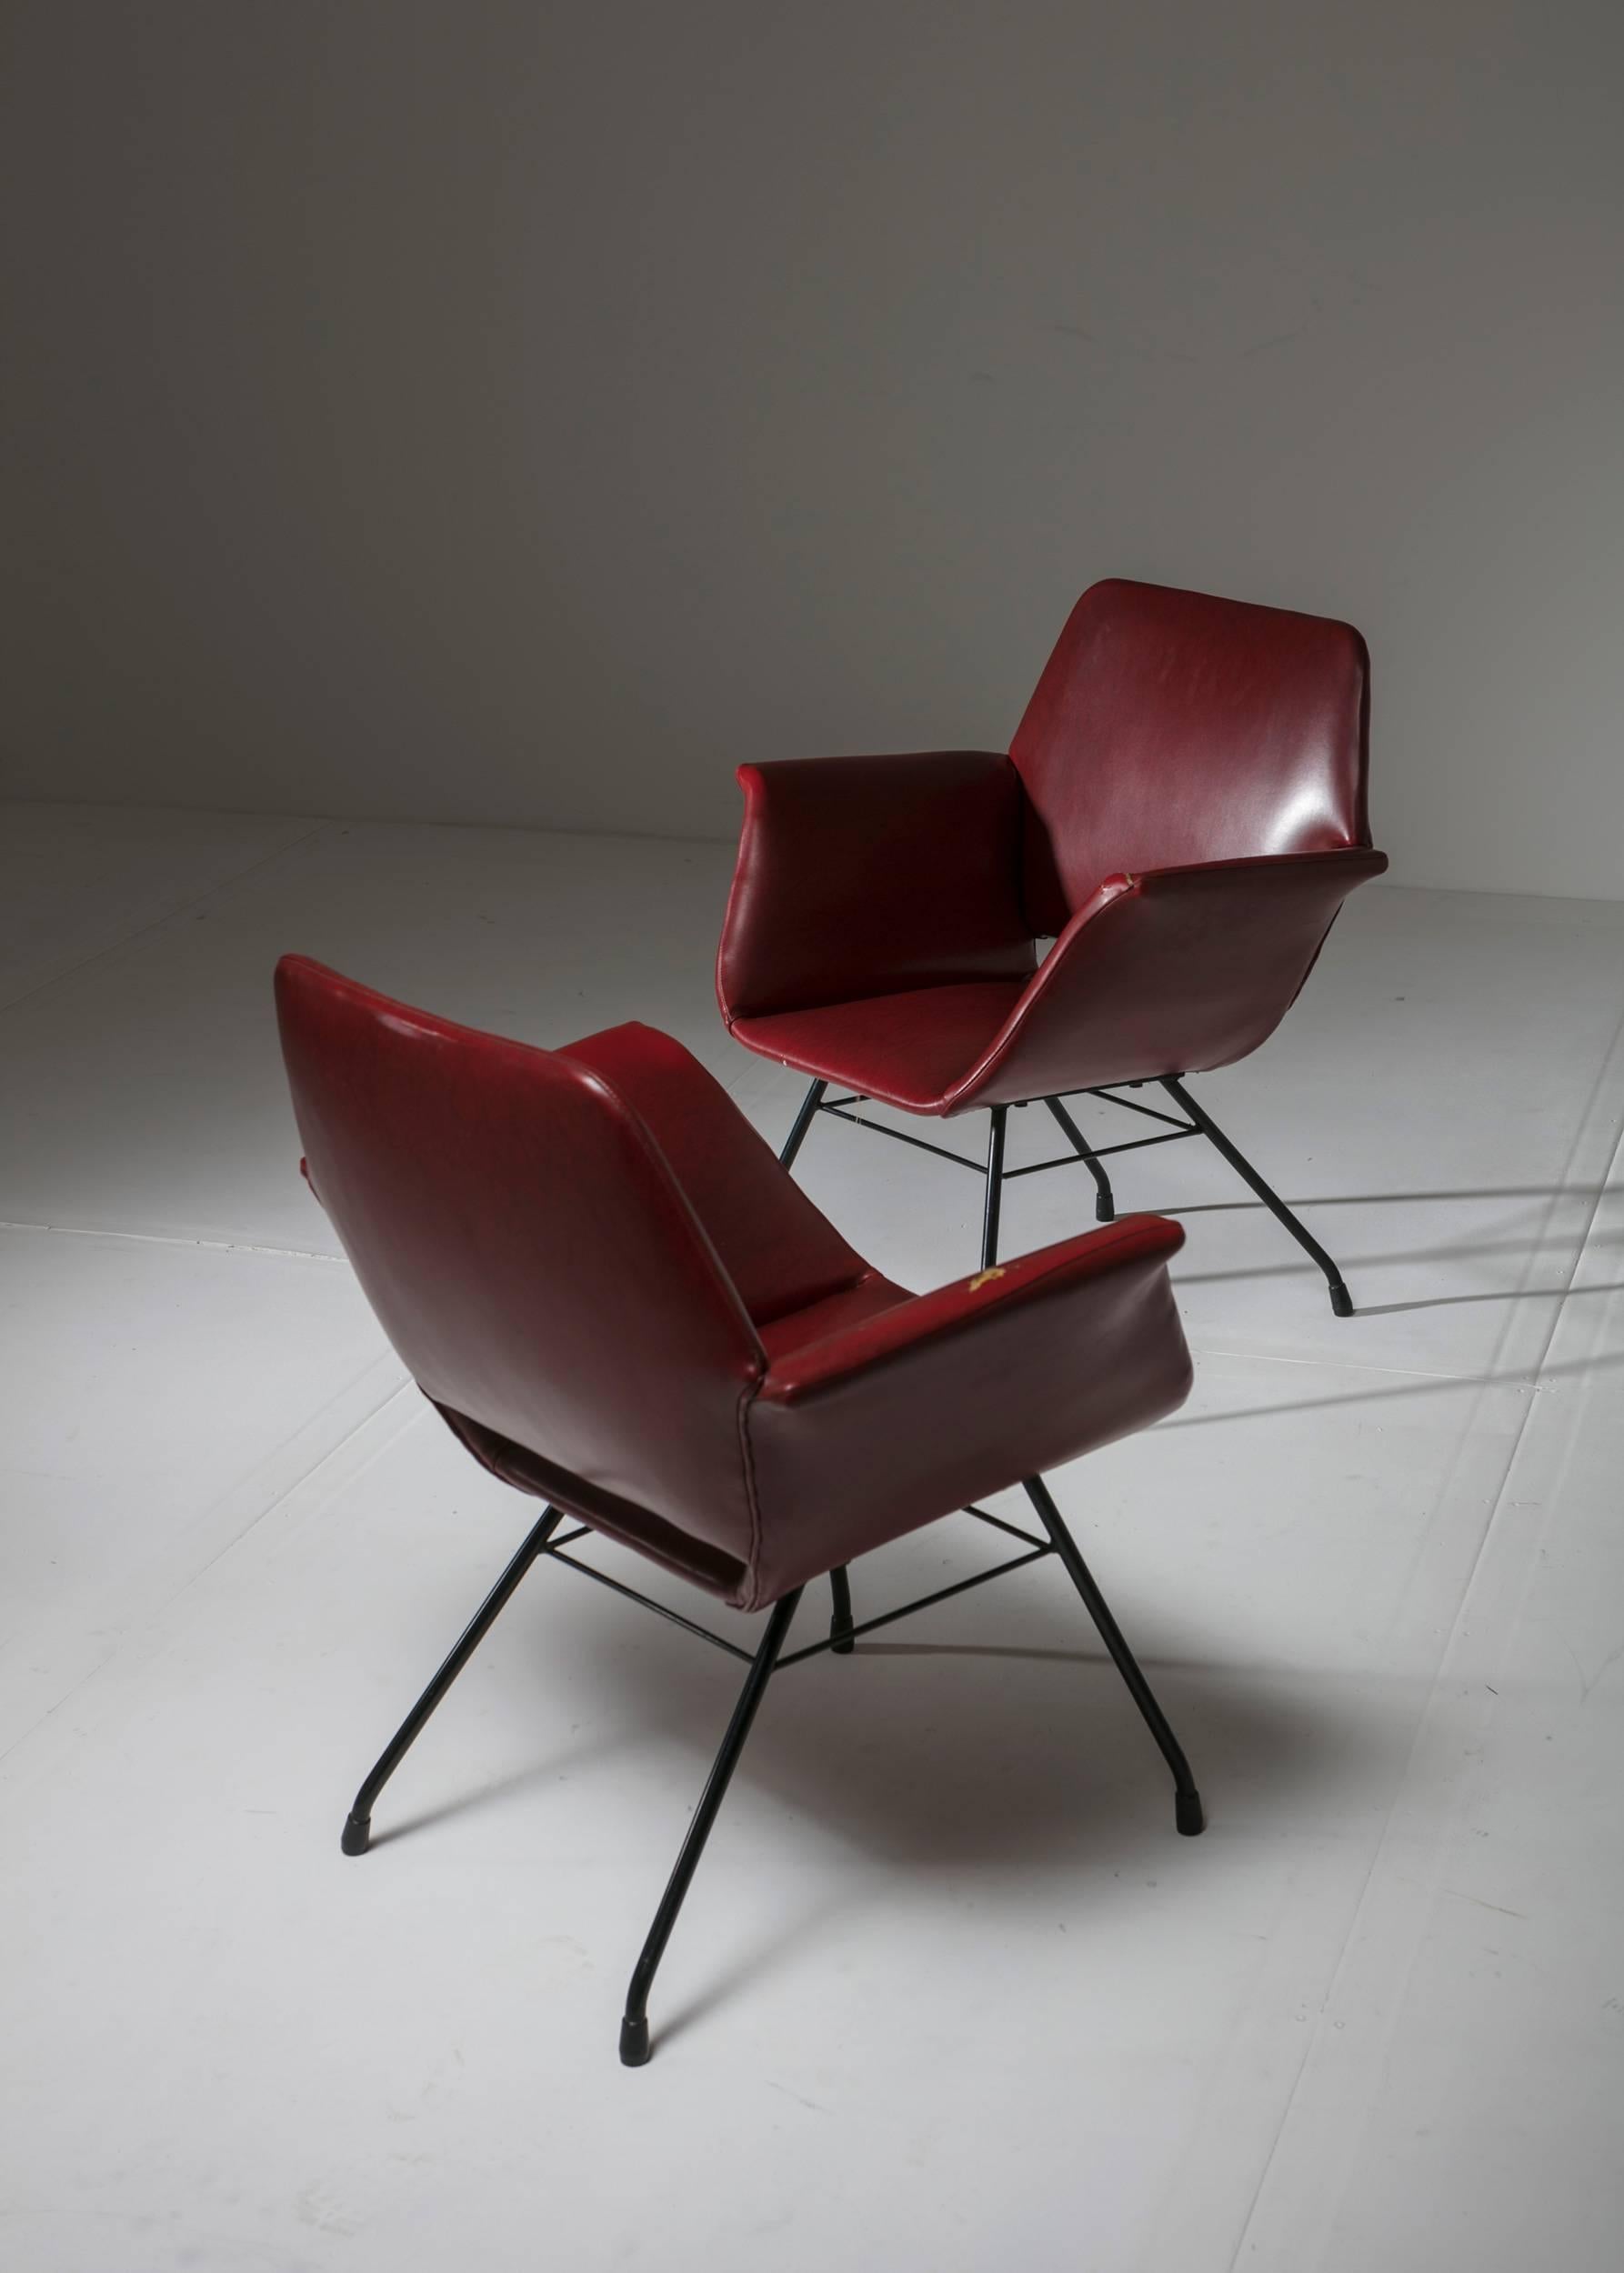 Remarkable set of two Italian 1950s armchairs.
Thin metal frame and sleek shaped seat with visual connections to Joseph-André Motte work.
 